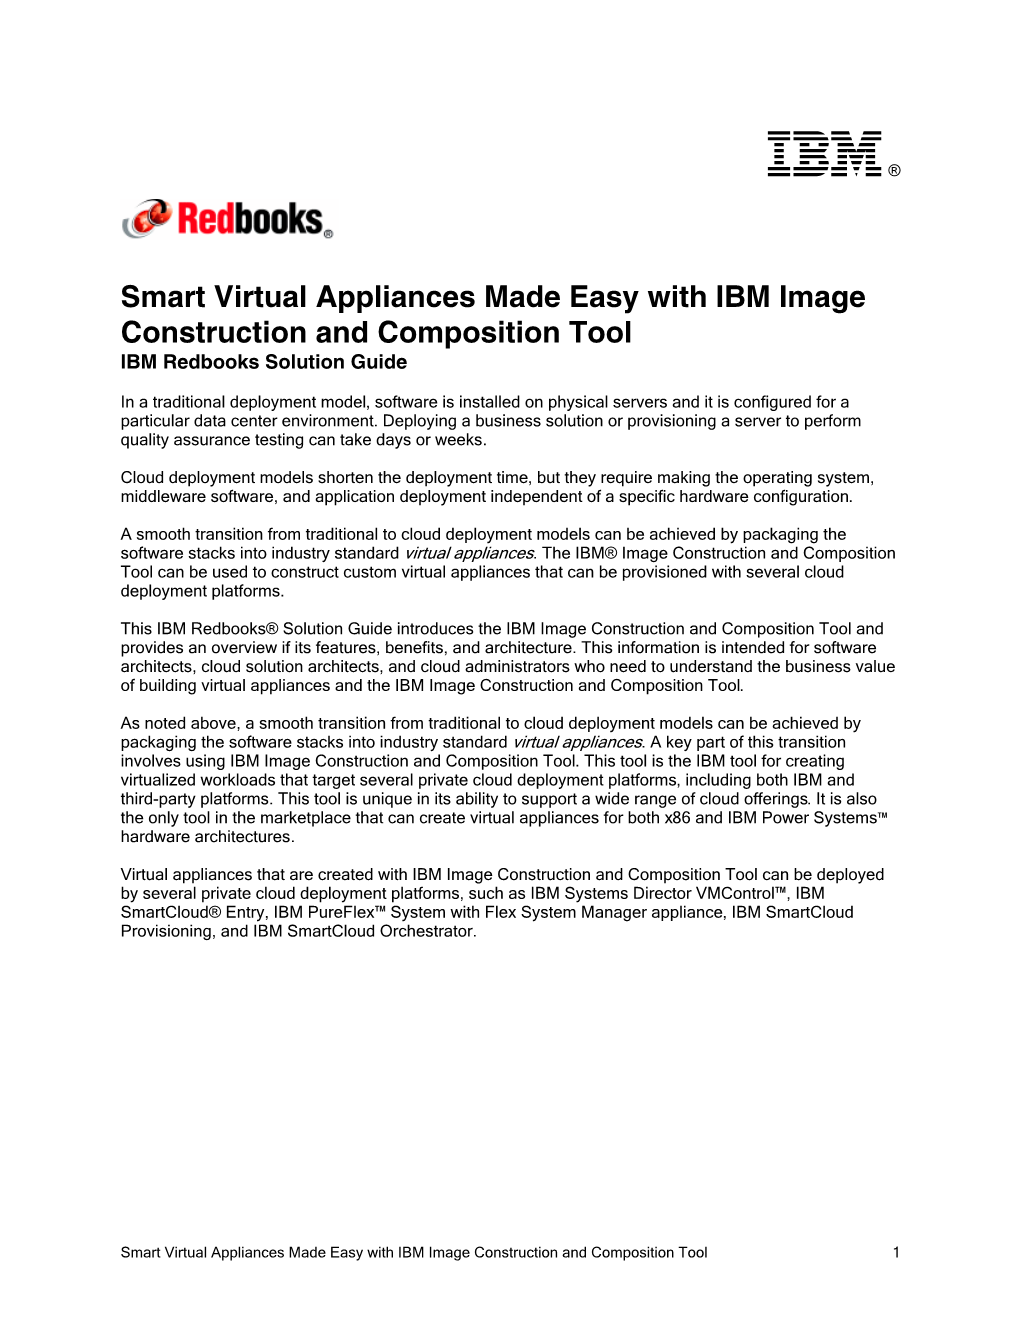 Smart Virtual Appliances Made Easy with IBM Image Construction and Composition Tool IBM Redbooks Solution Guide